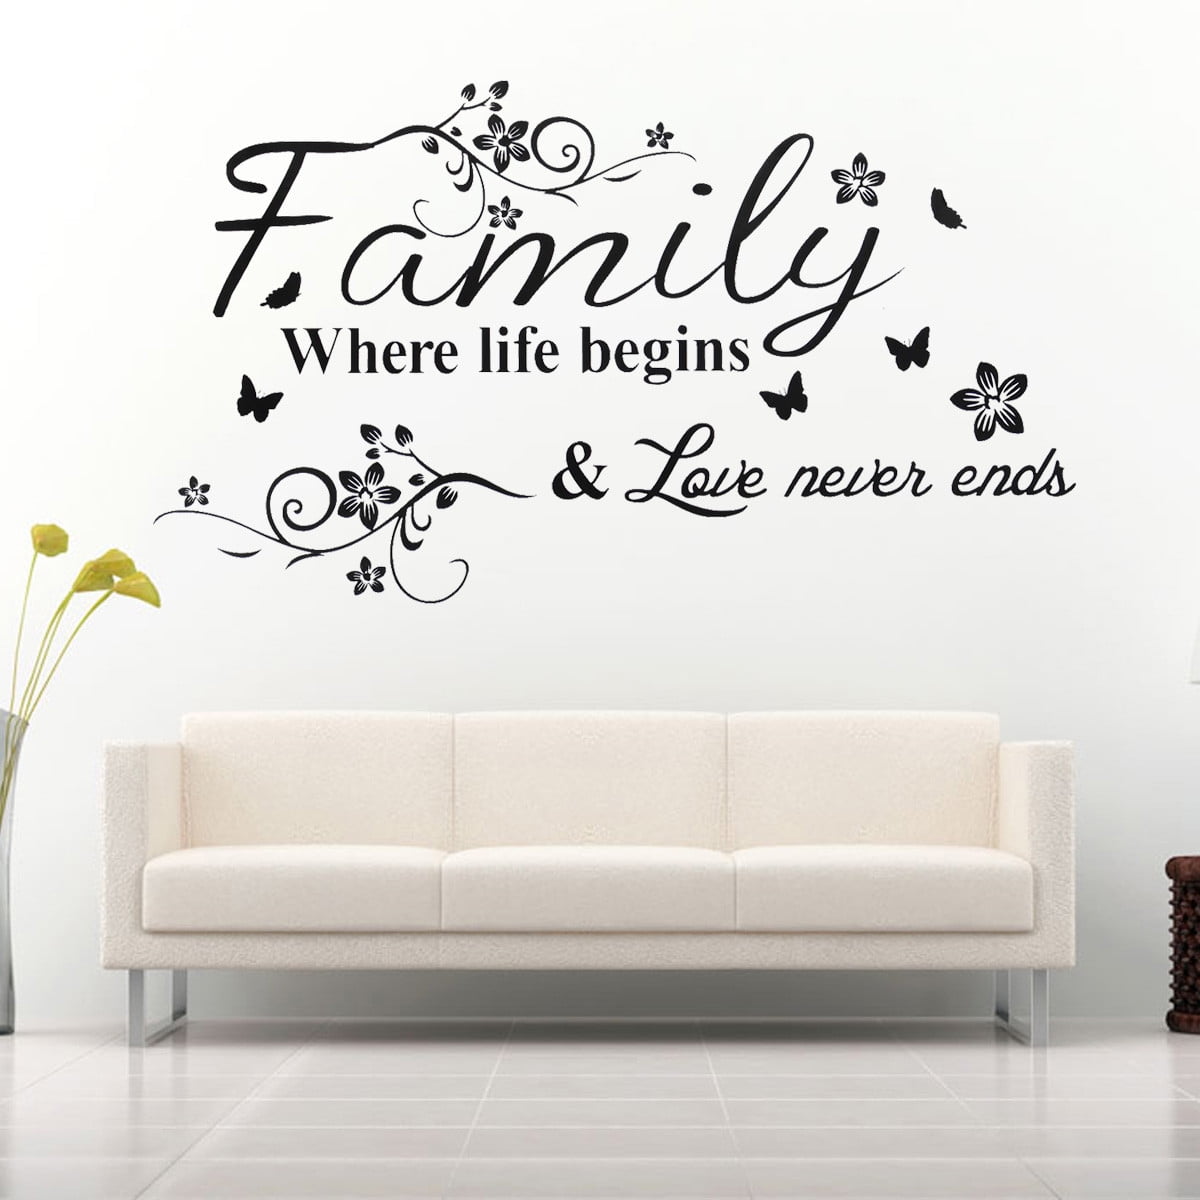 New Vinyl Quote Art Wall Stickers Bedroom Removable Decal Mural DIY Home Decor 